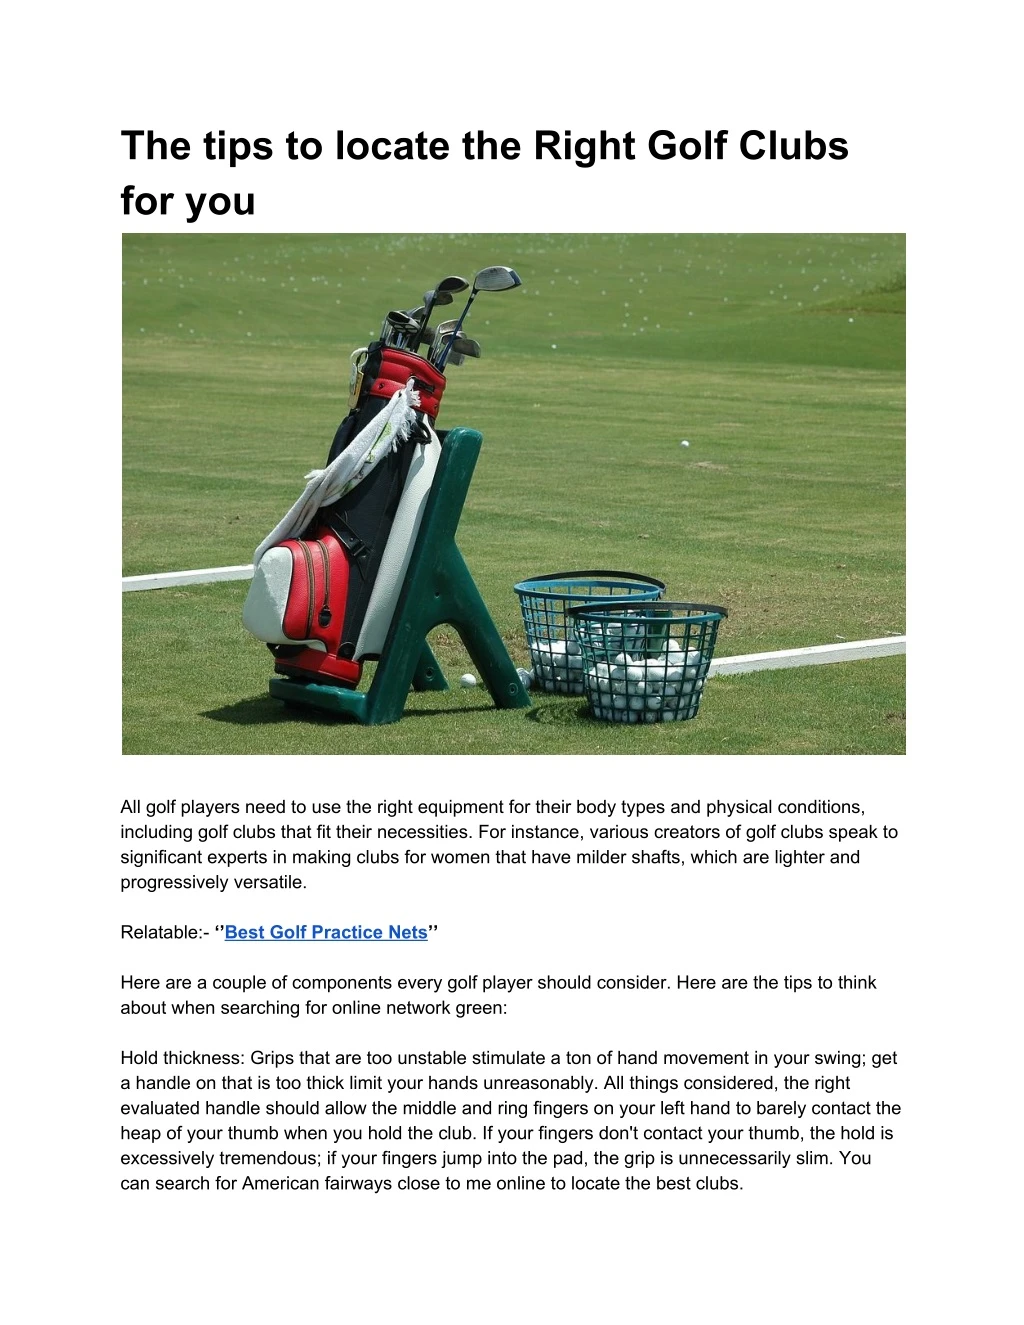 the tips to locate the right golf clubs for you